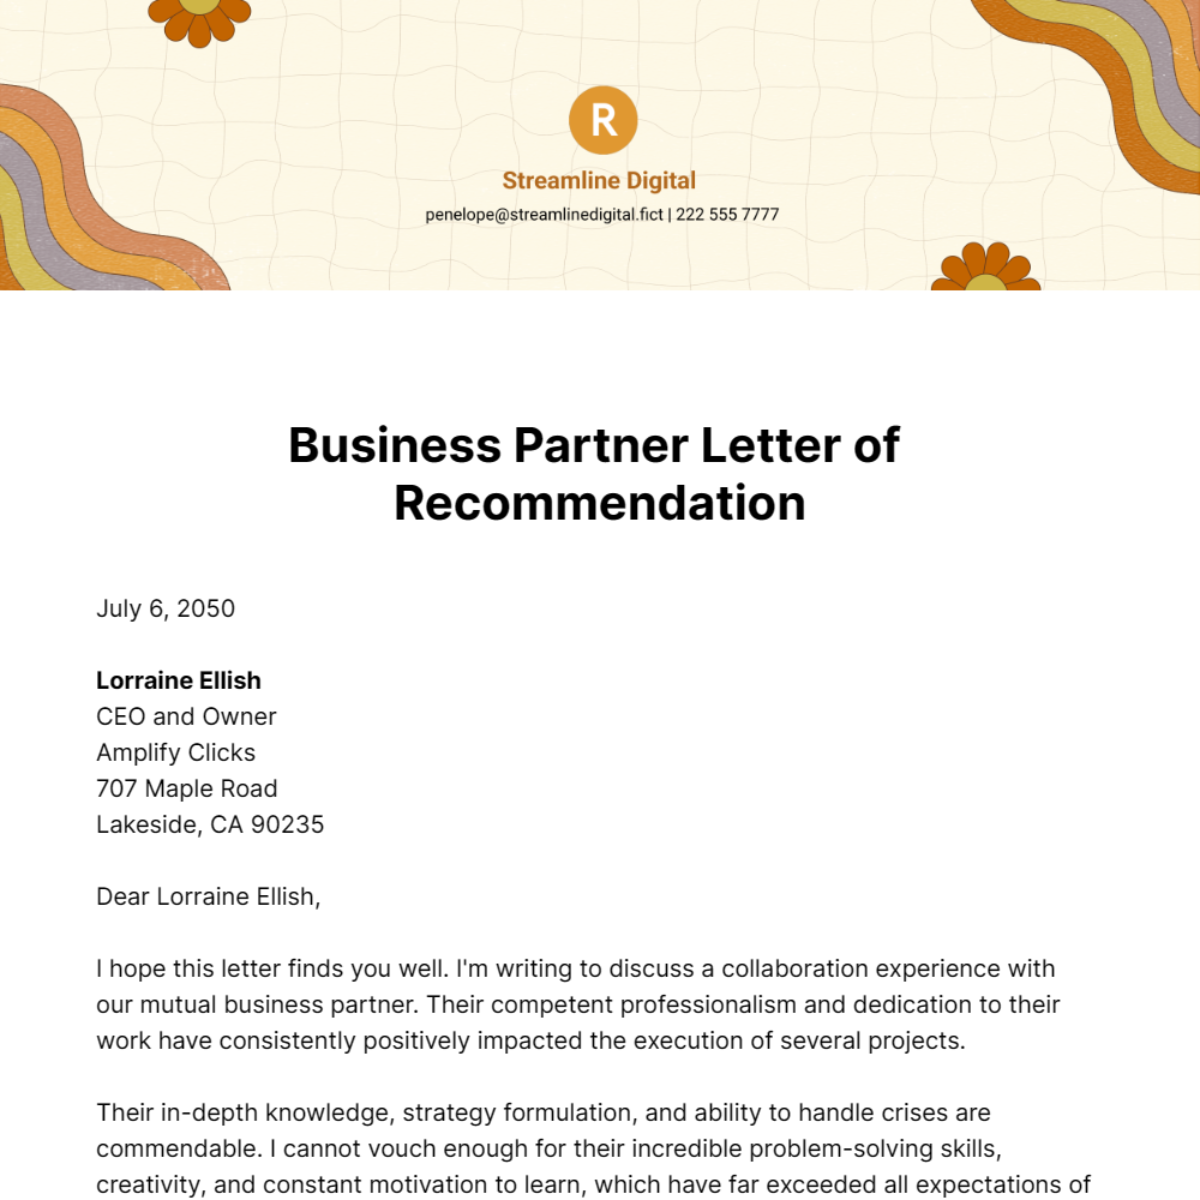 Business Partner Letter of Recommendation Template